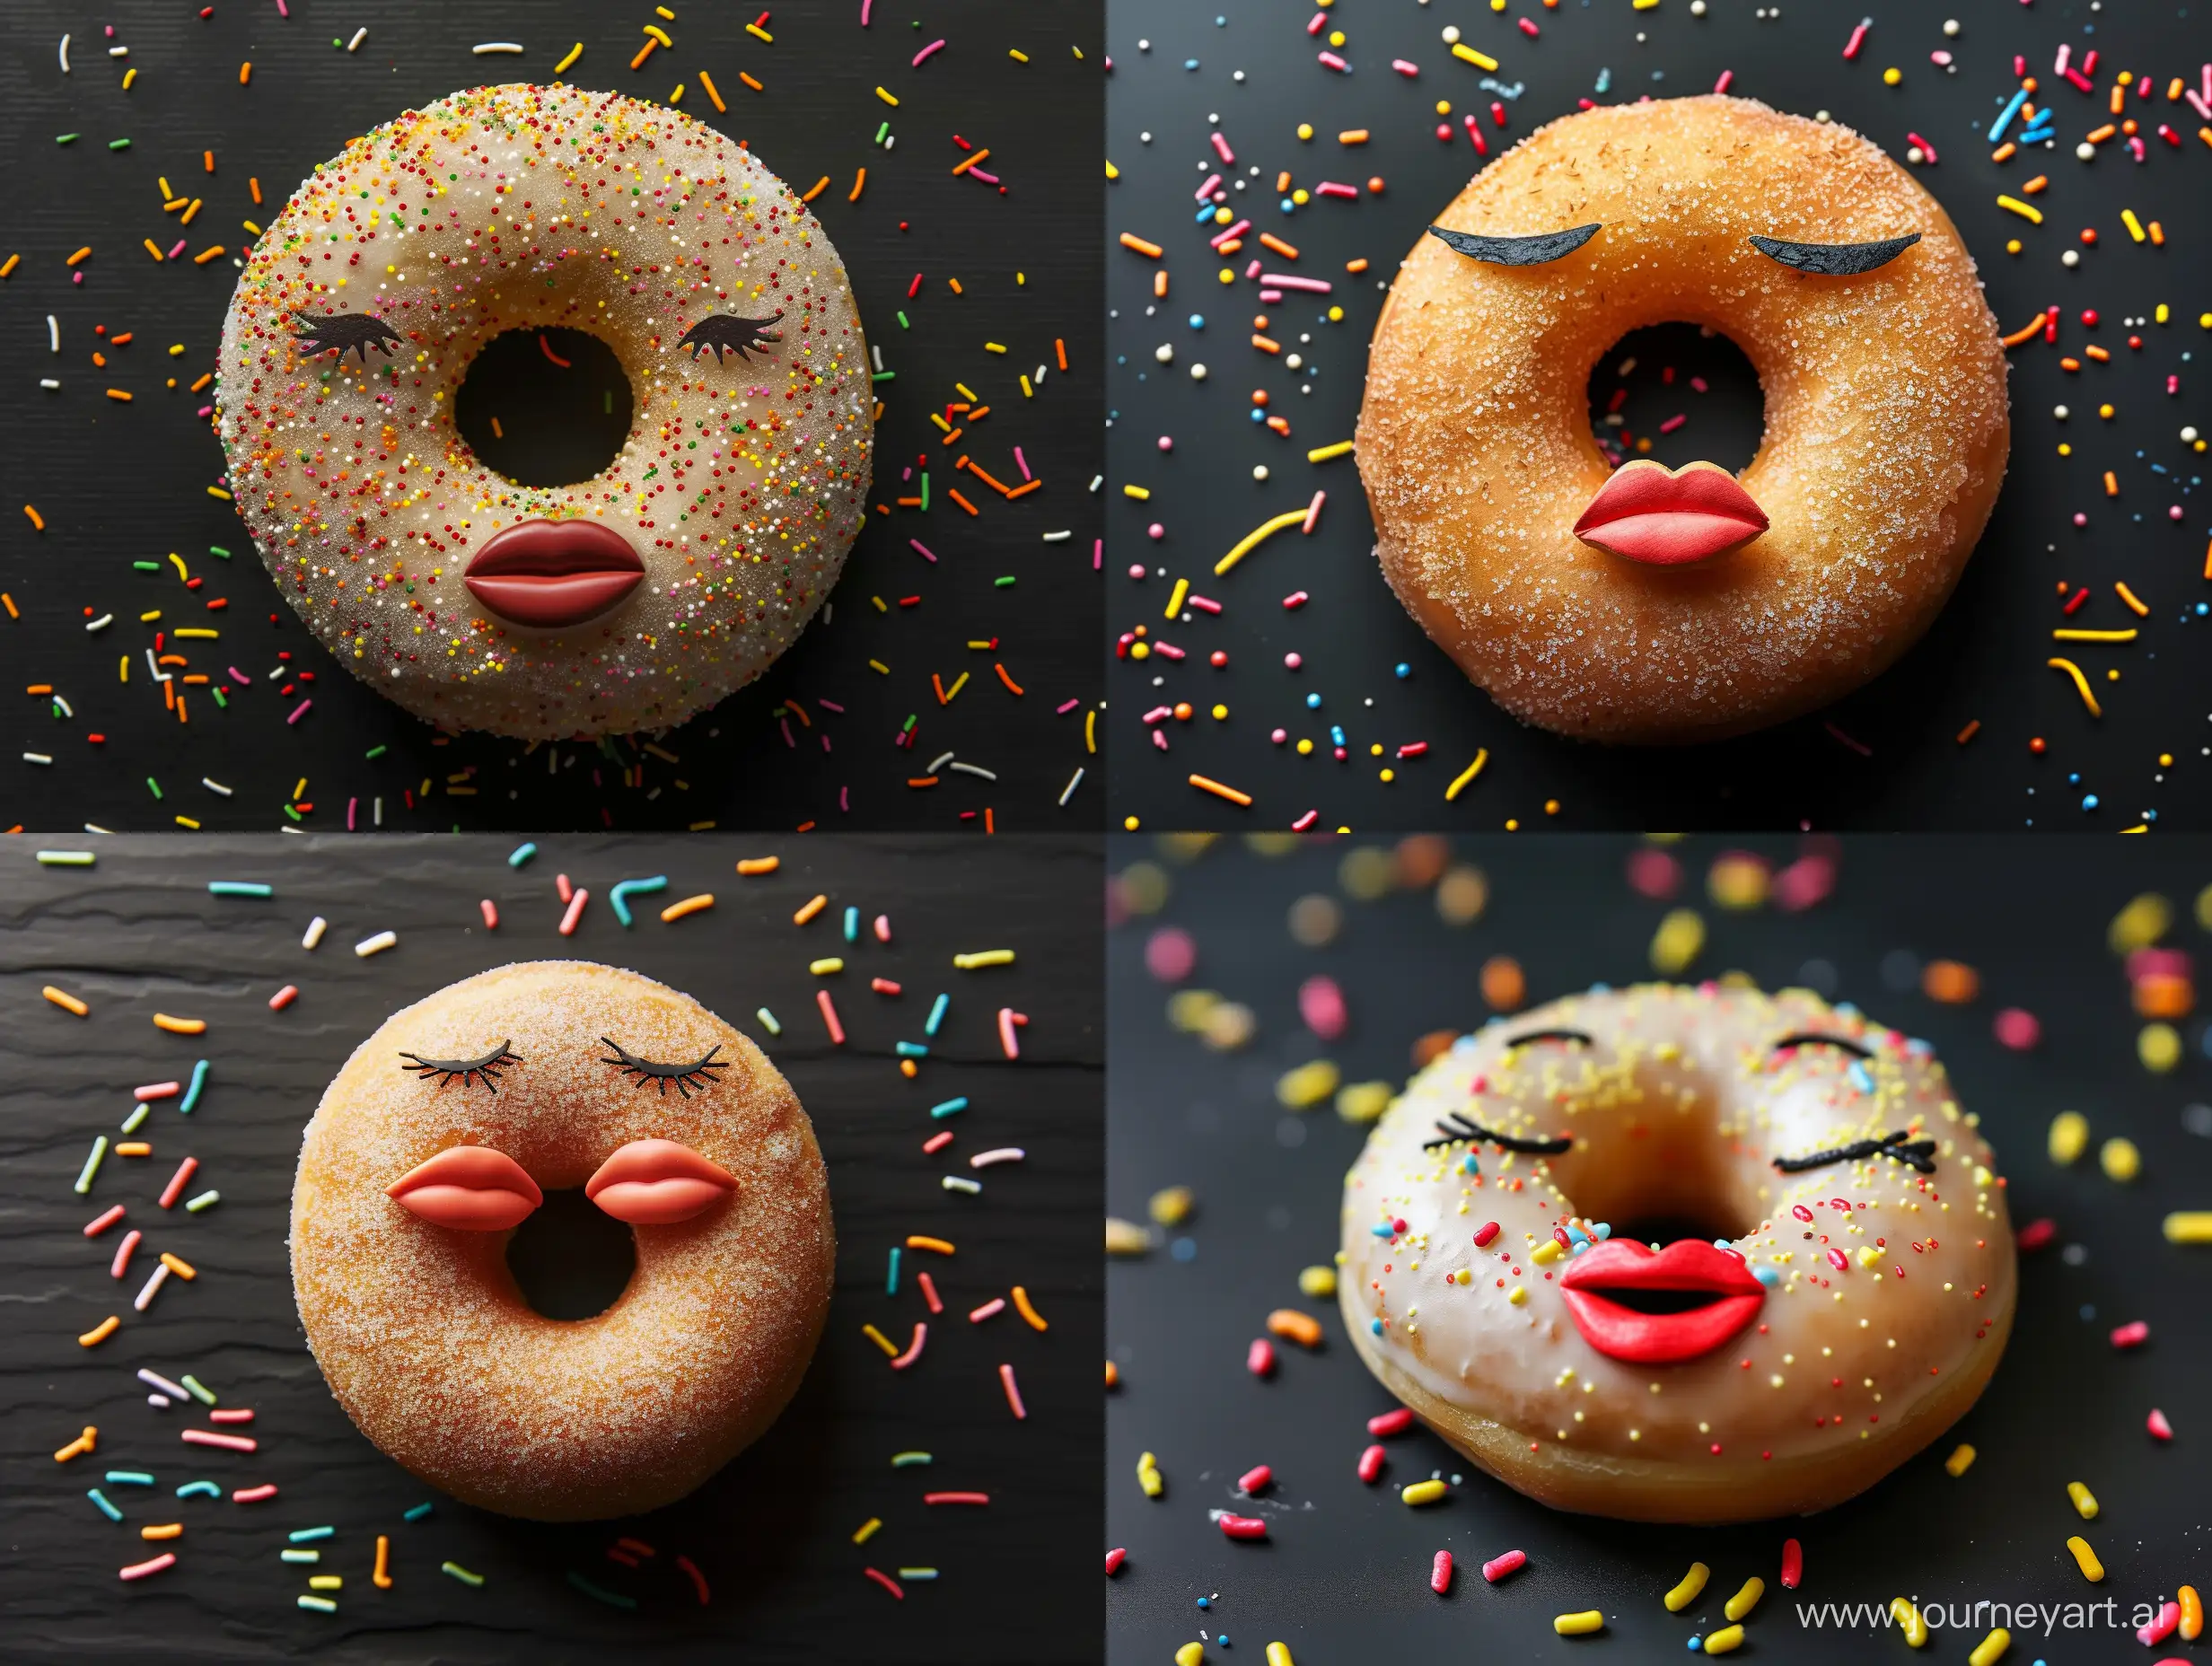 Playful-Donut-with-Expressive-Face-and-Colorful-Sprinkles-on-Black-Background